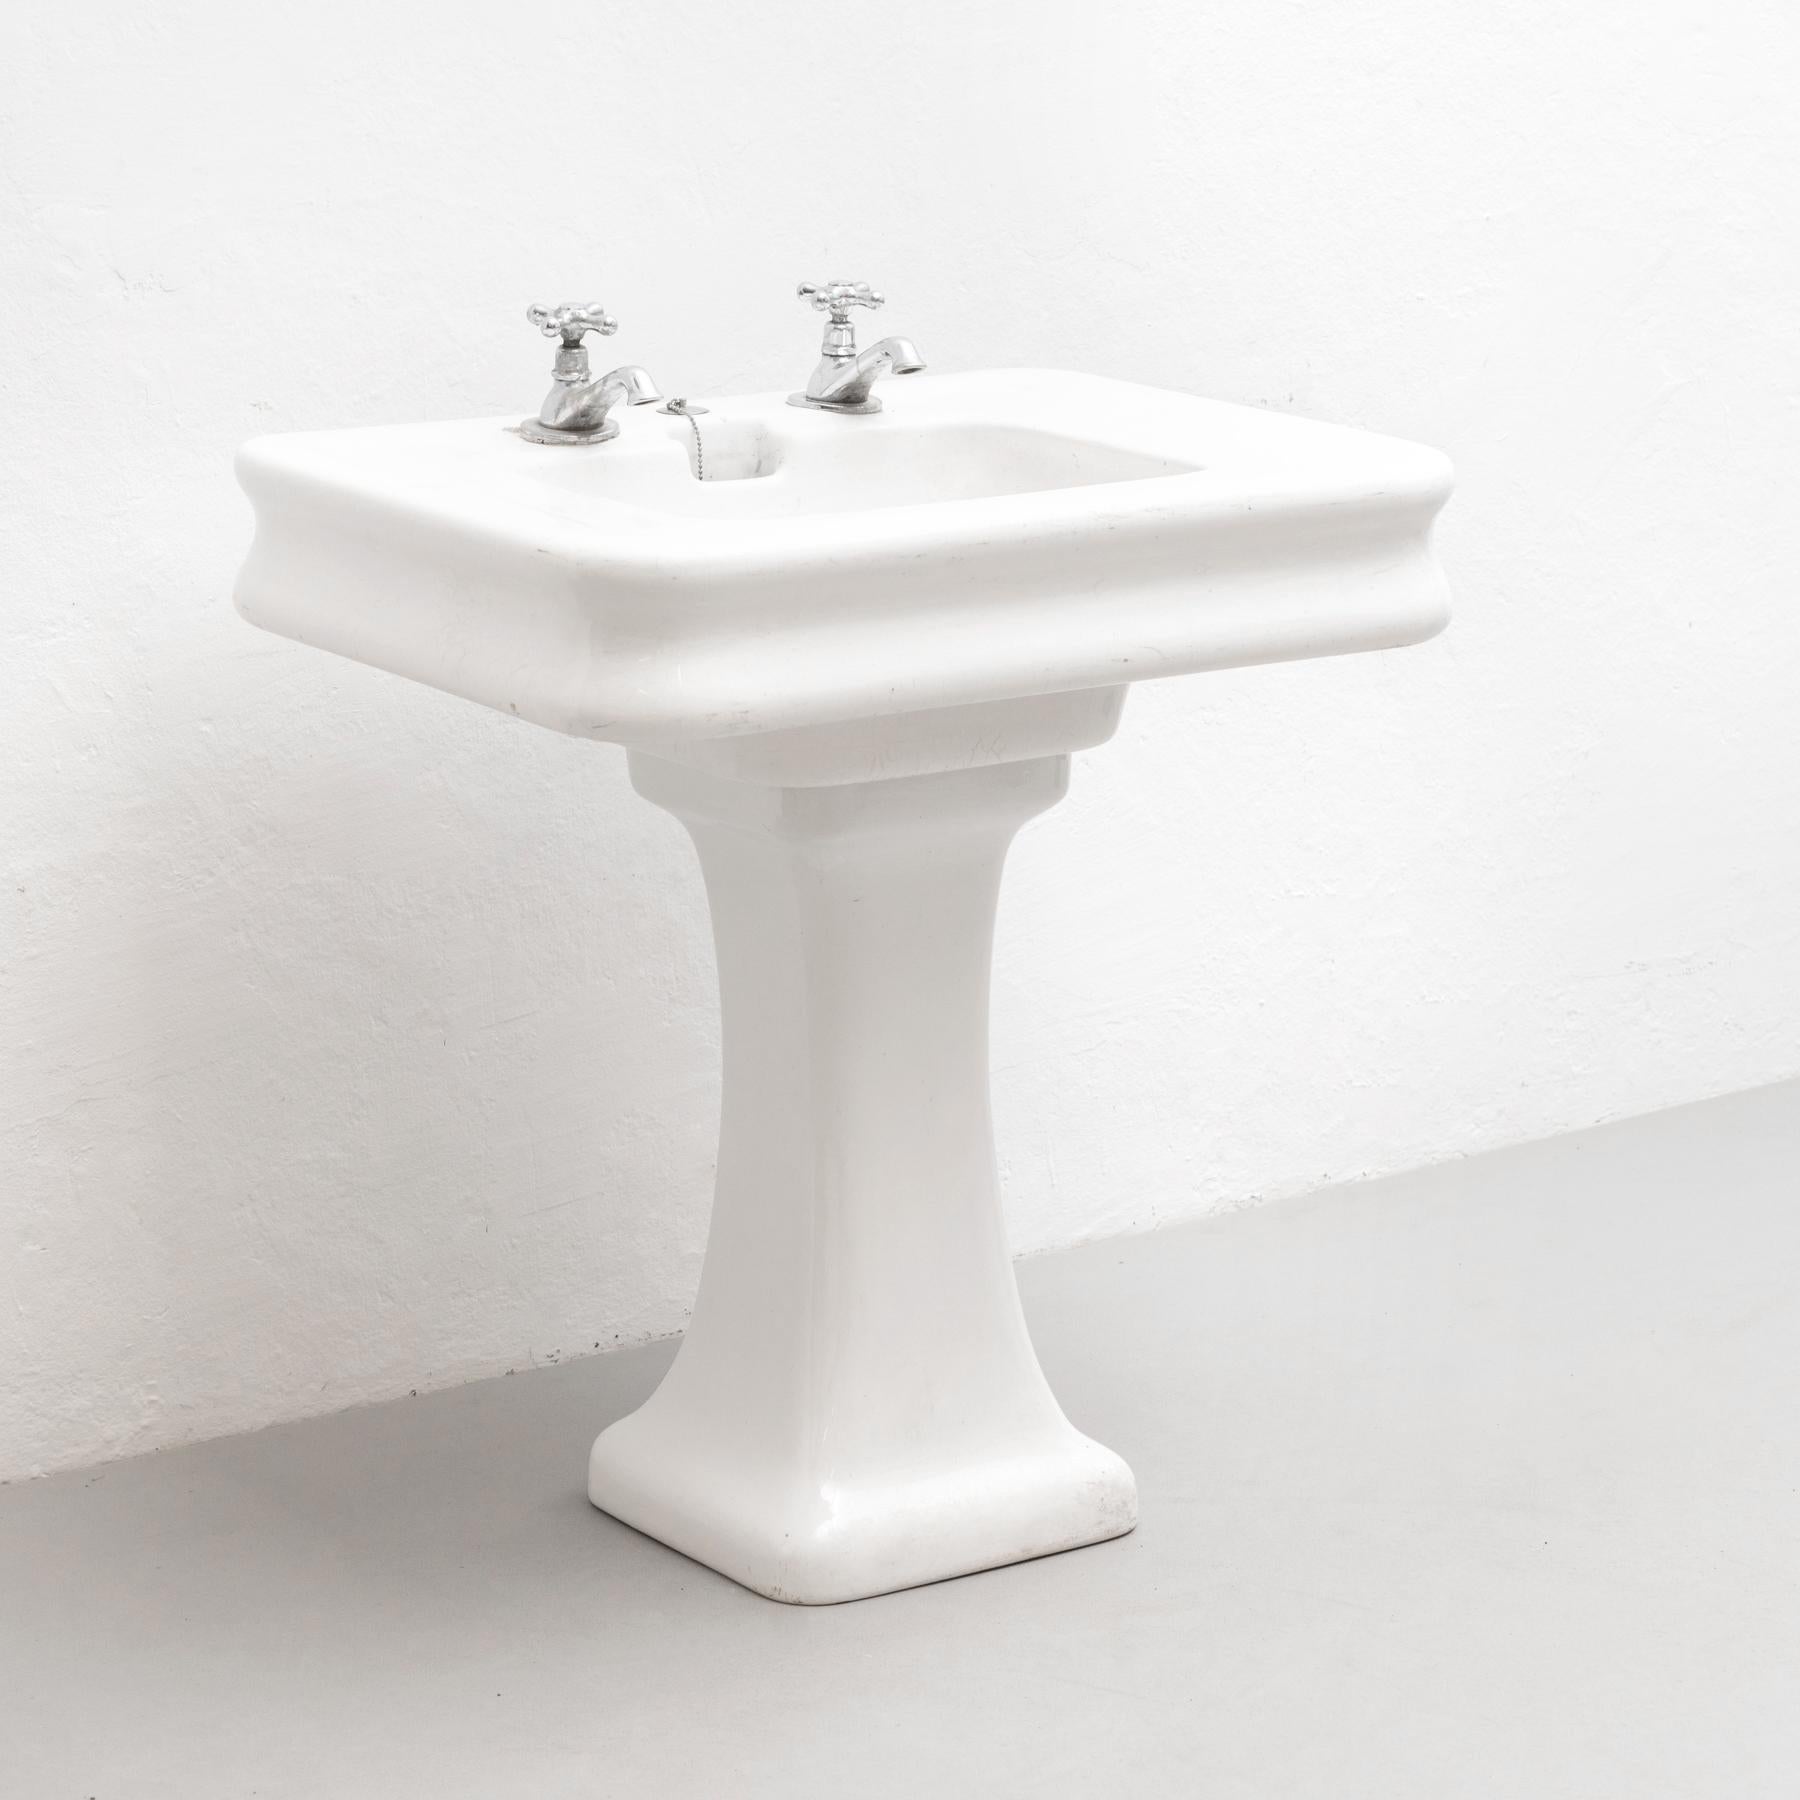 Antique vintage ceramic standing wash basin sink made in the traditional Modernist style.

Washbasin used in the bathrooms by Antoni Gaudí in several of his architectural commissions. It can be found forming part of the emblematic decoration of